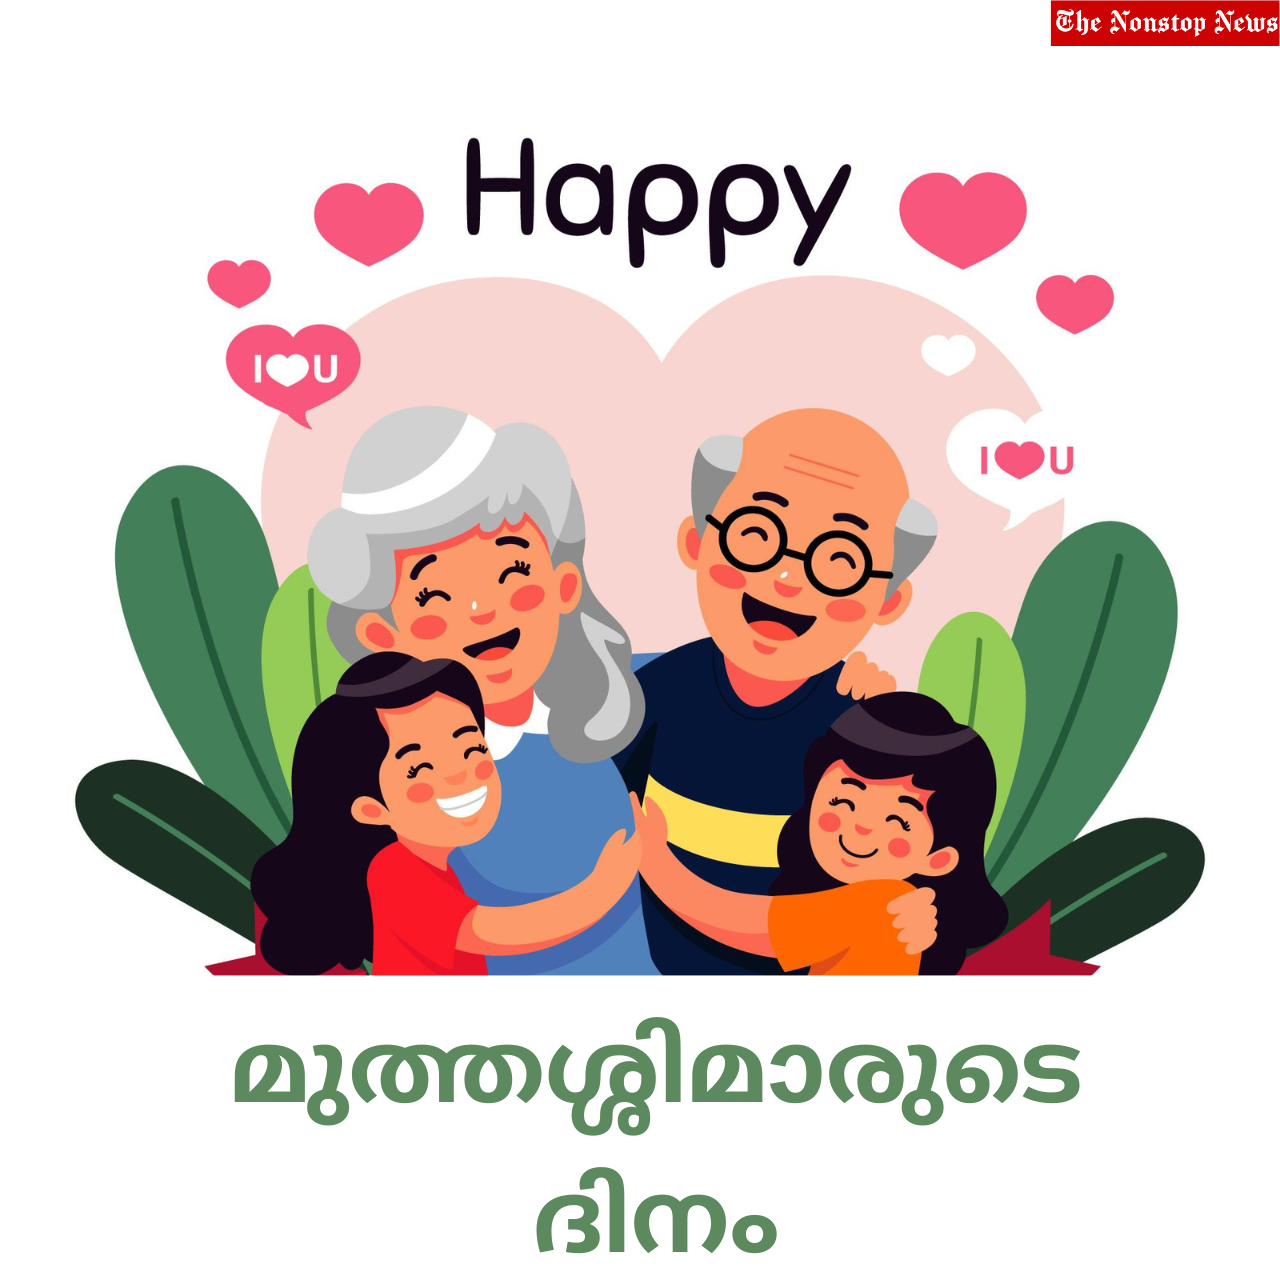 Grandparents' Day 2022: Malayalam Quotes, Images, Wishes, Greetings, Messages To Share